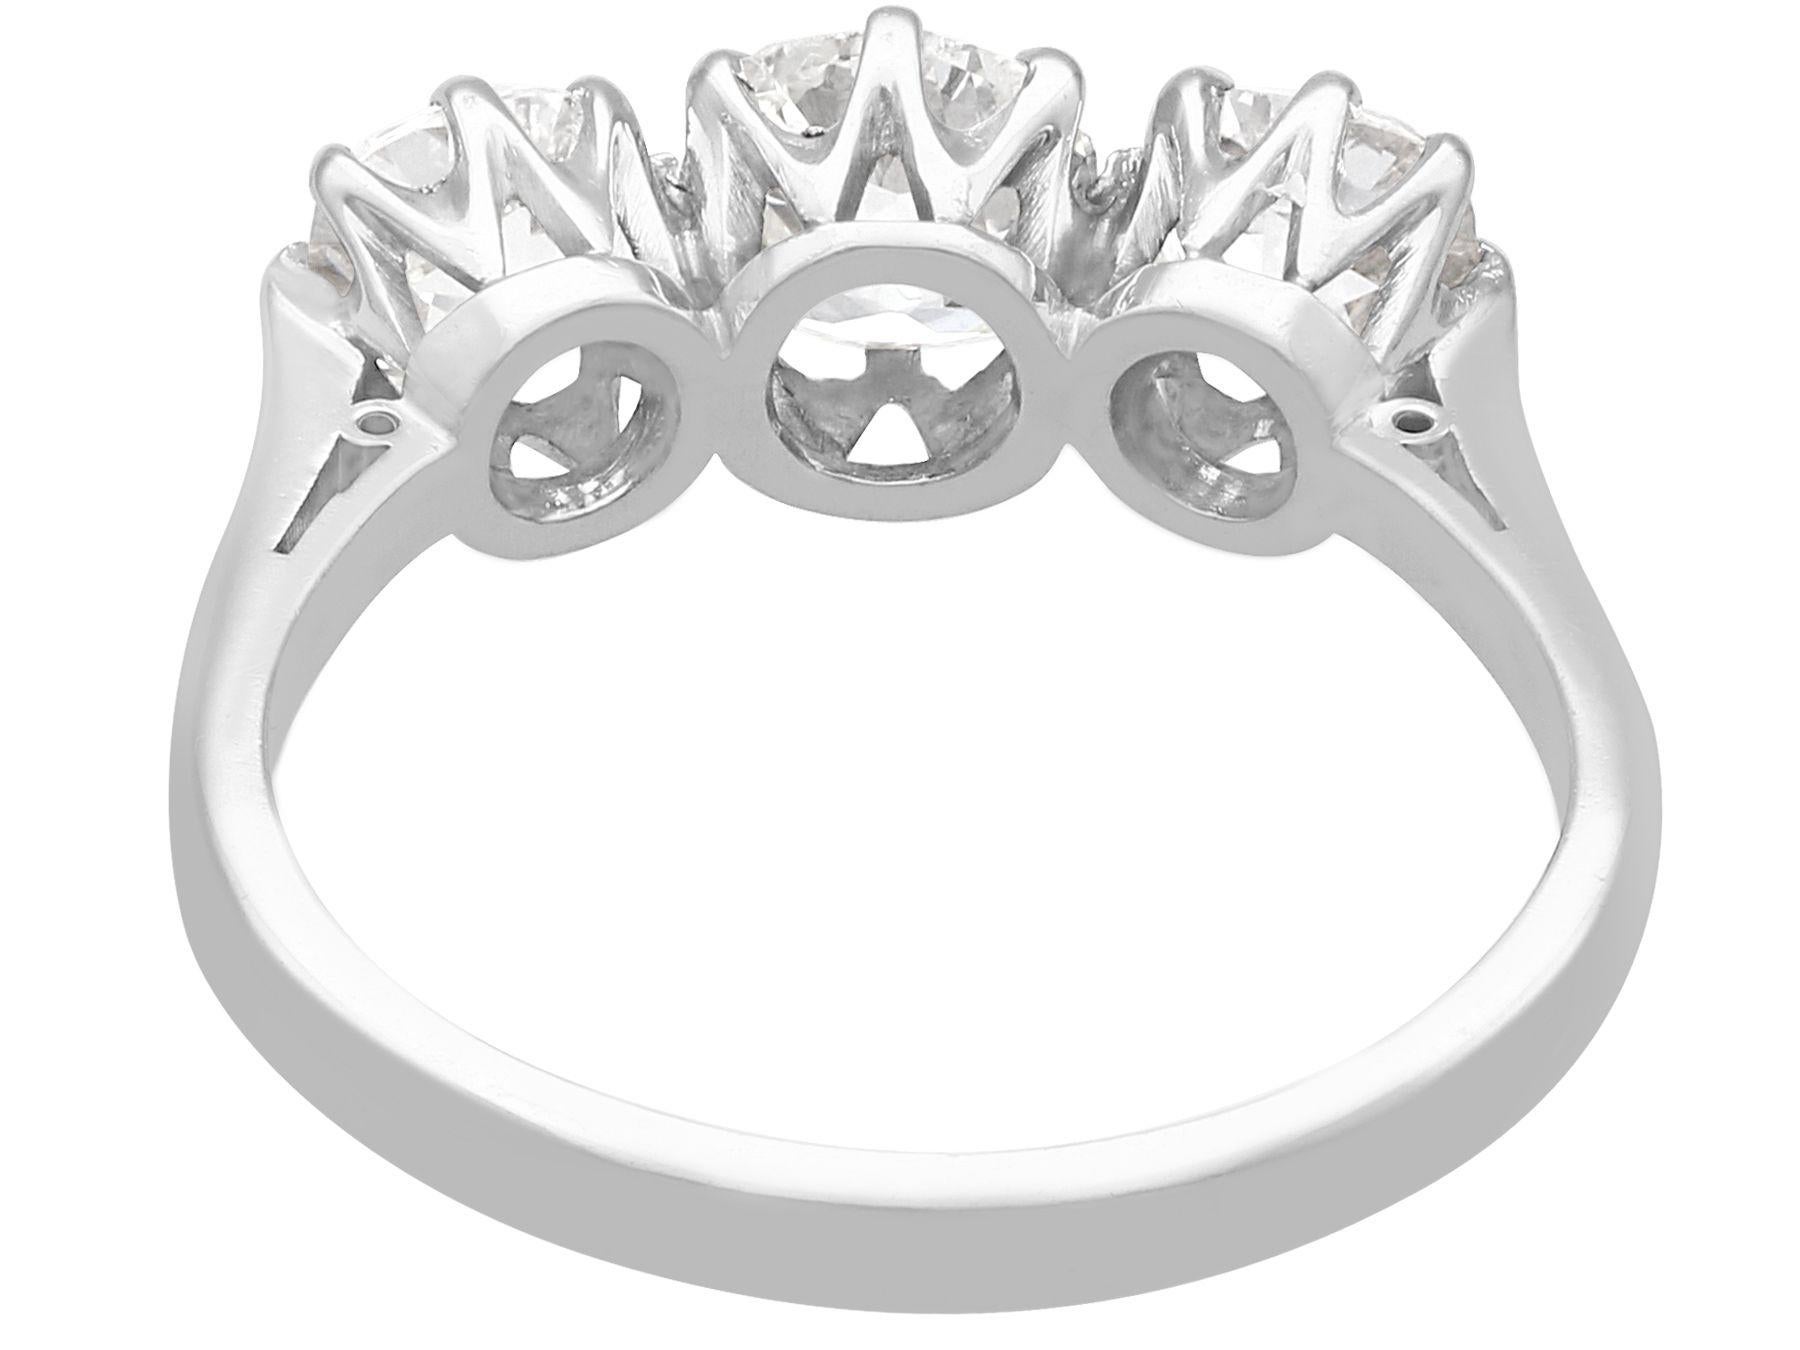 Women's or Men's 1.85 Carat Diamond and 18 Carat White Gold Trilogy Ring, Antique and Vintage